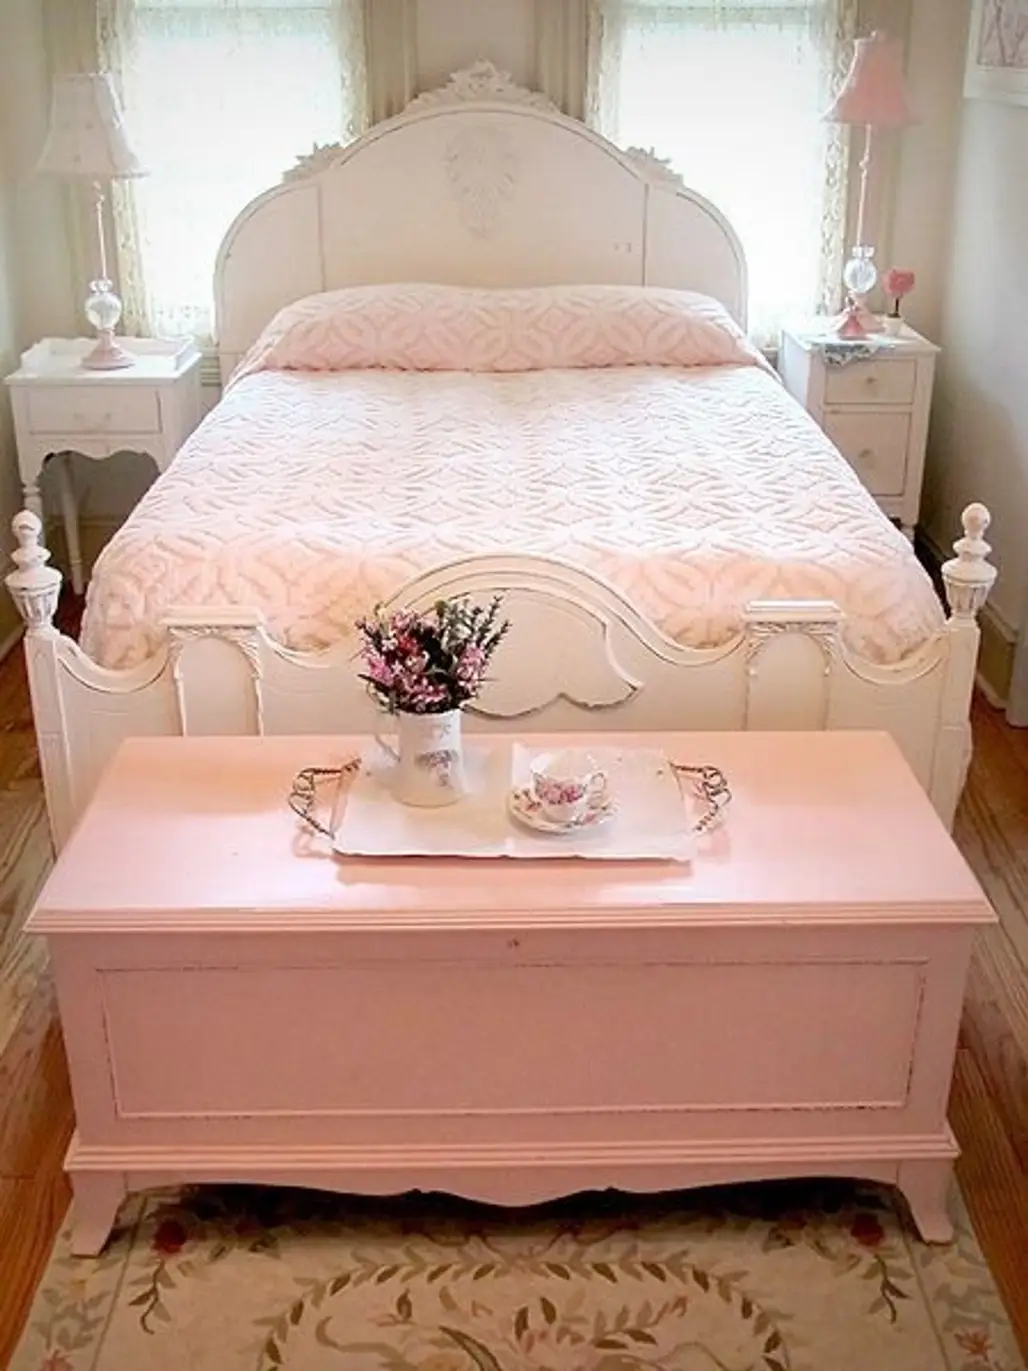 furniture,room,bed,bed sheet,product,